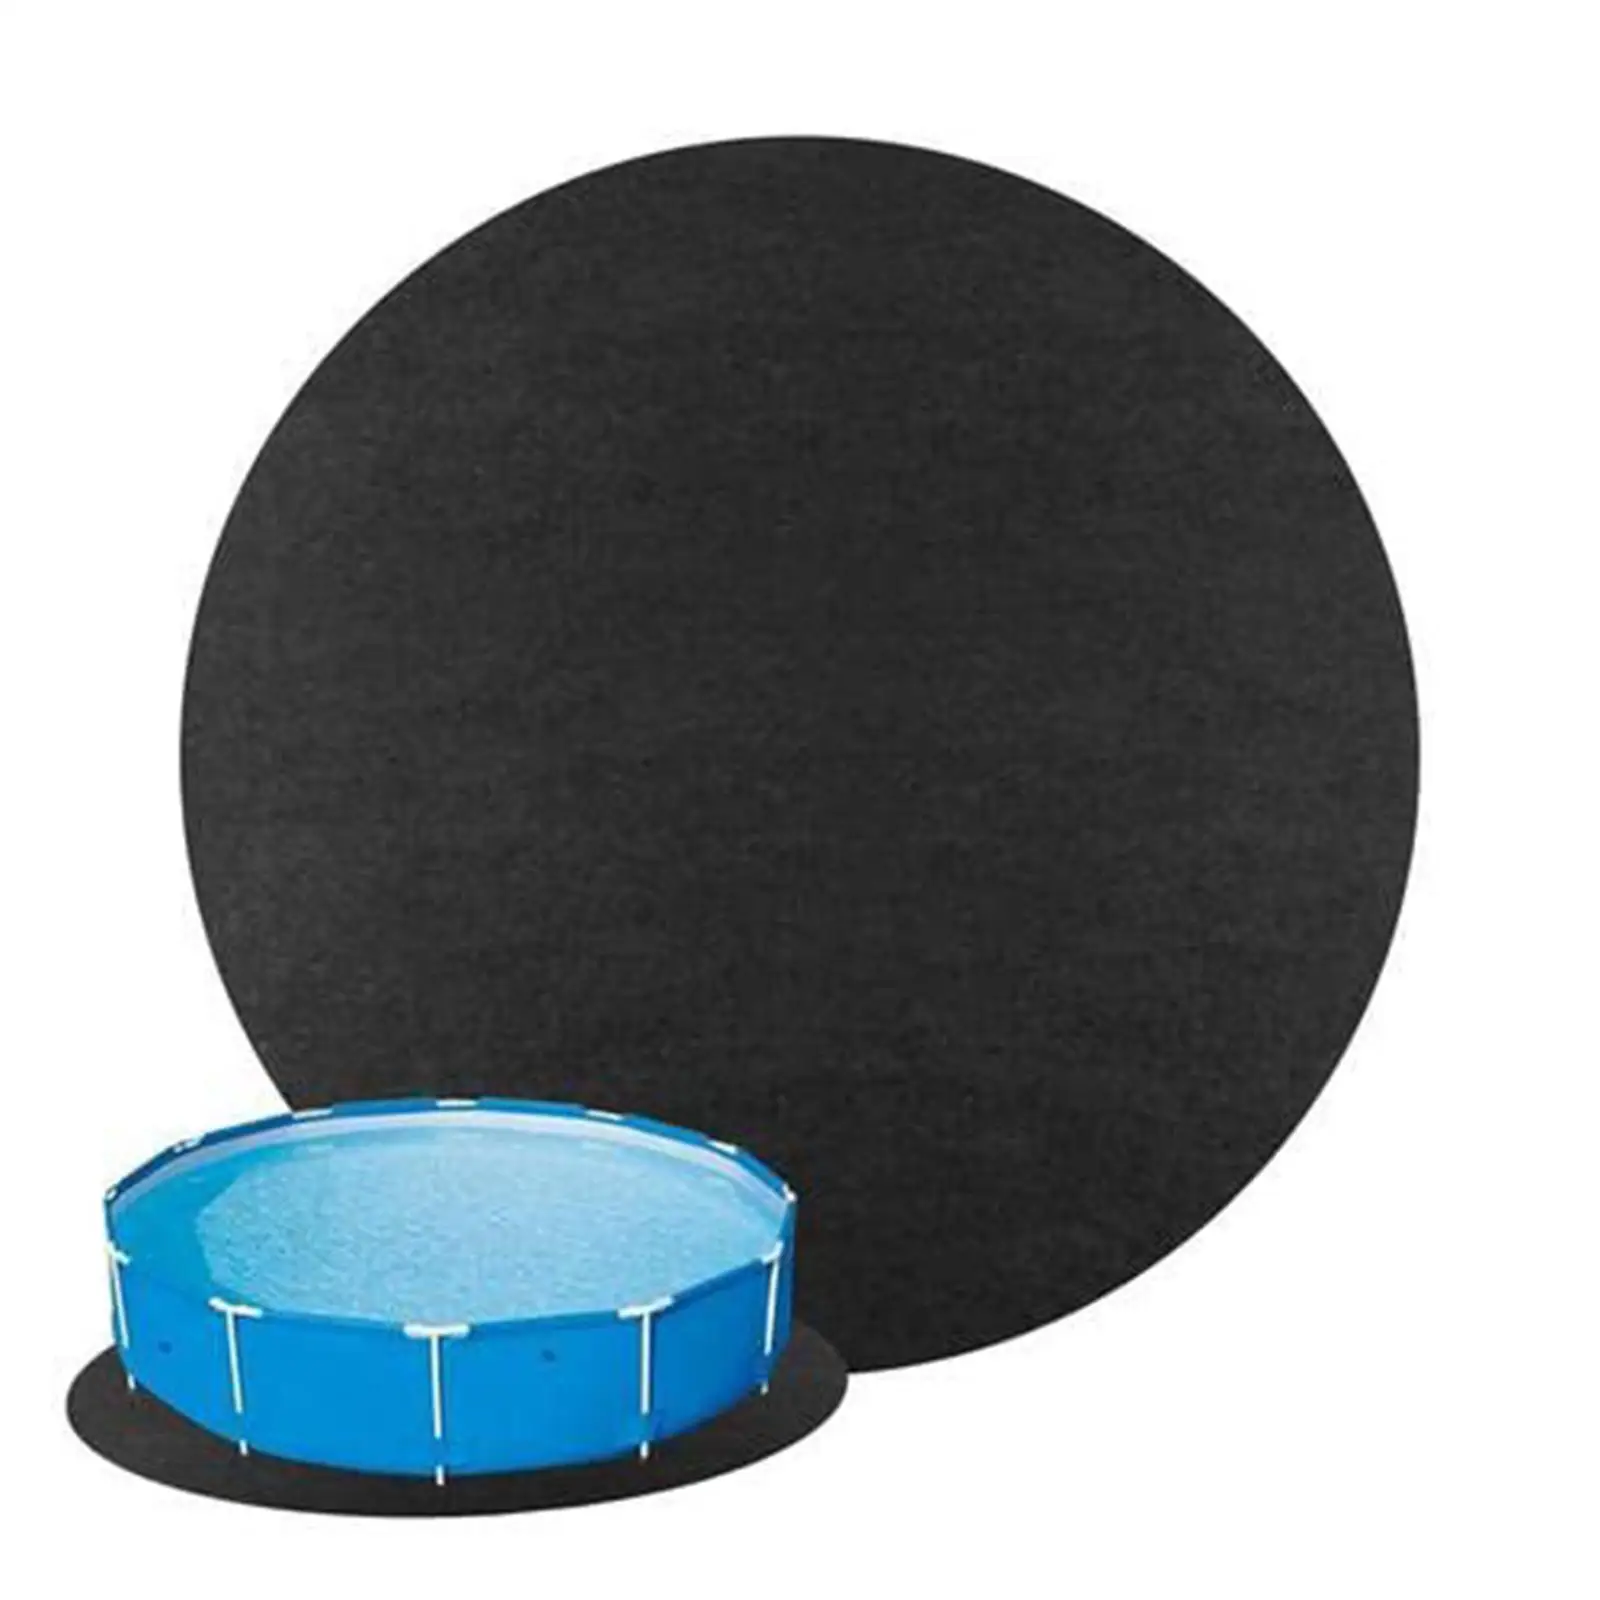 Pool Liner Pad, Durable Puncture Resistant Pool Accessories Pool Liner Pads for above Ground Pool, for 4m Garden Outdoor Home